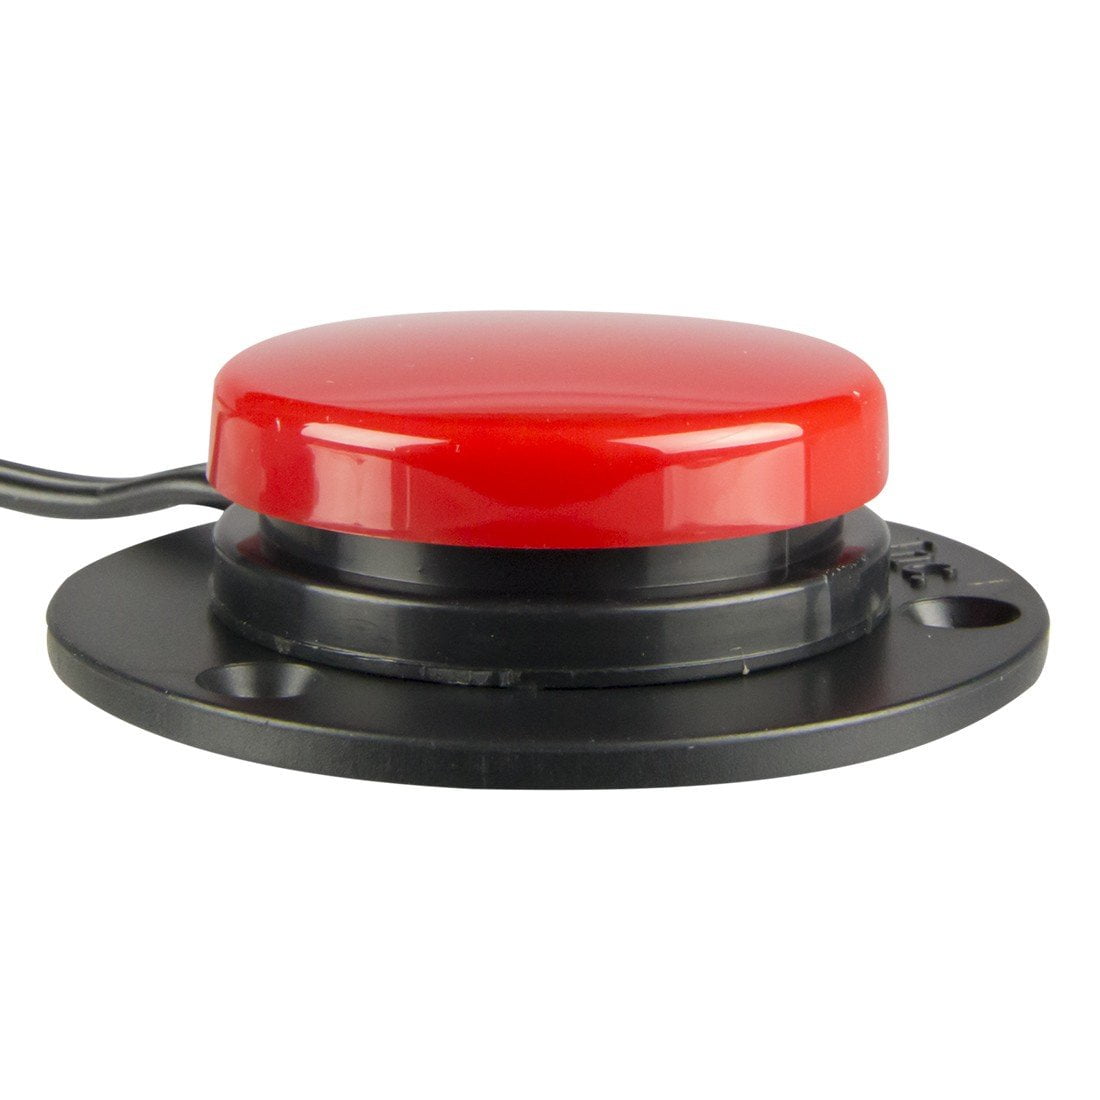 AbleNet 100SPR Specs Switch Red 